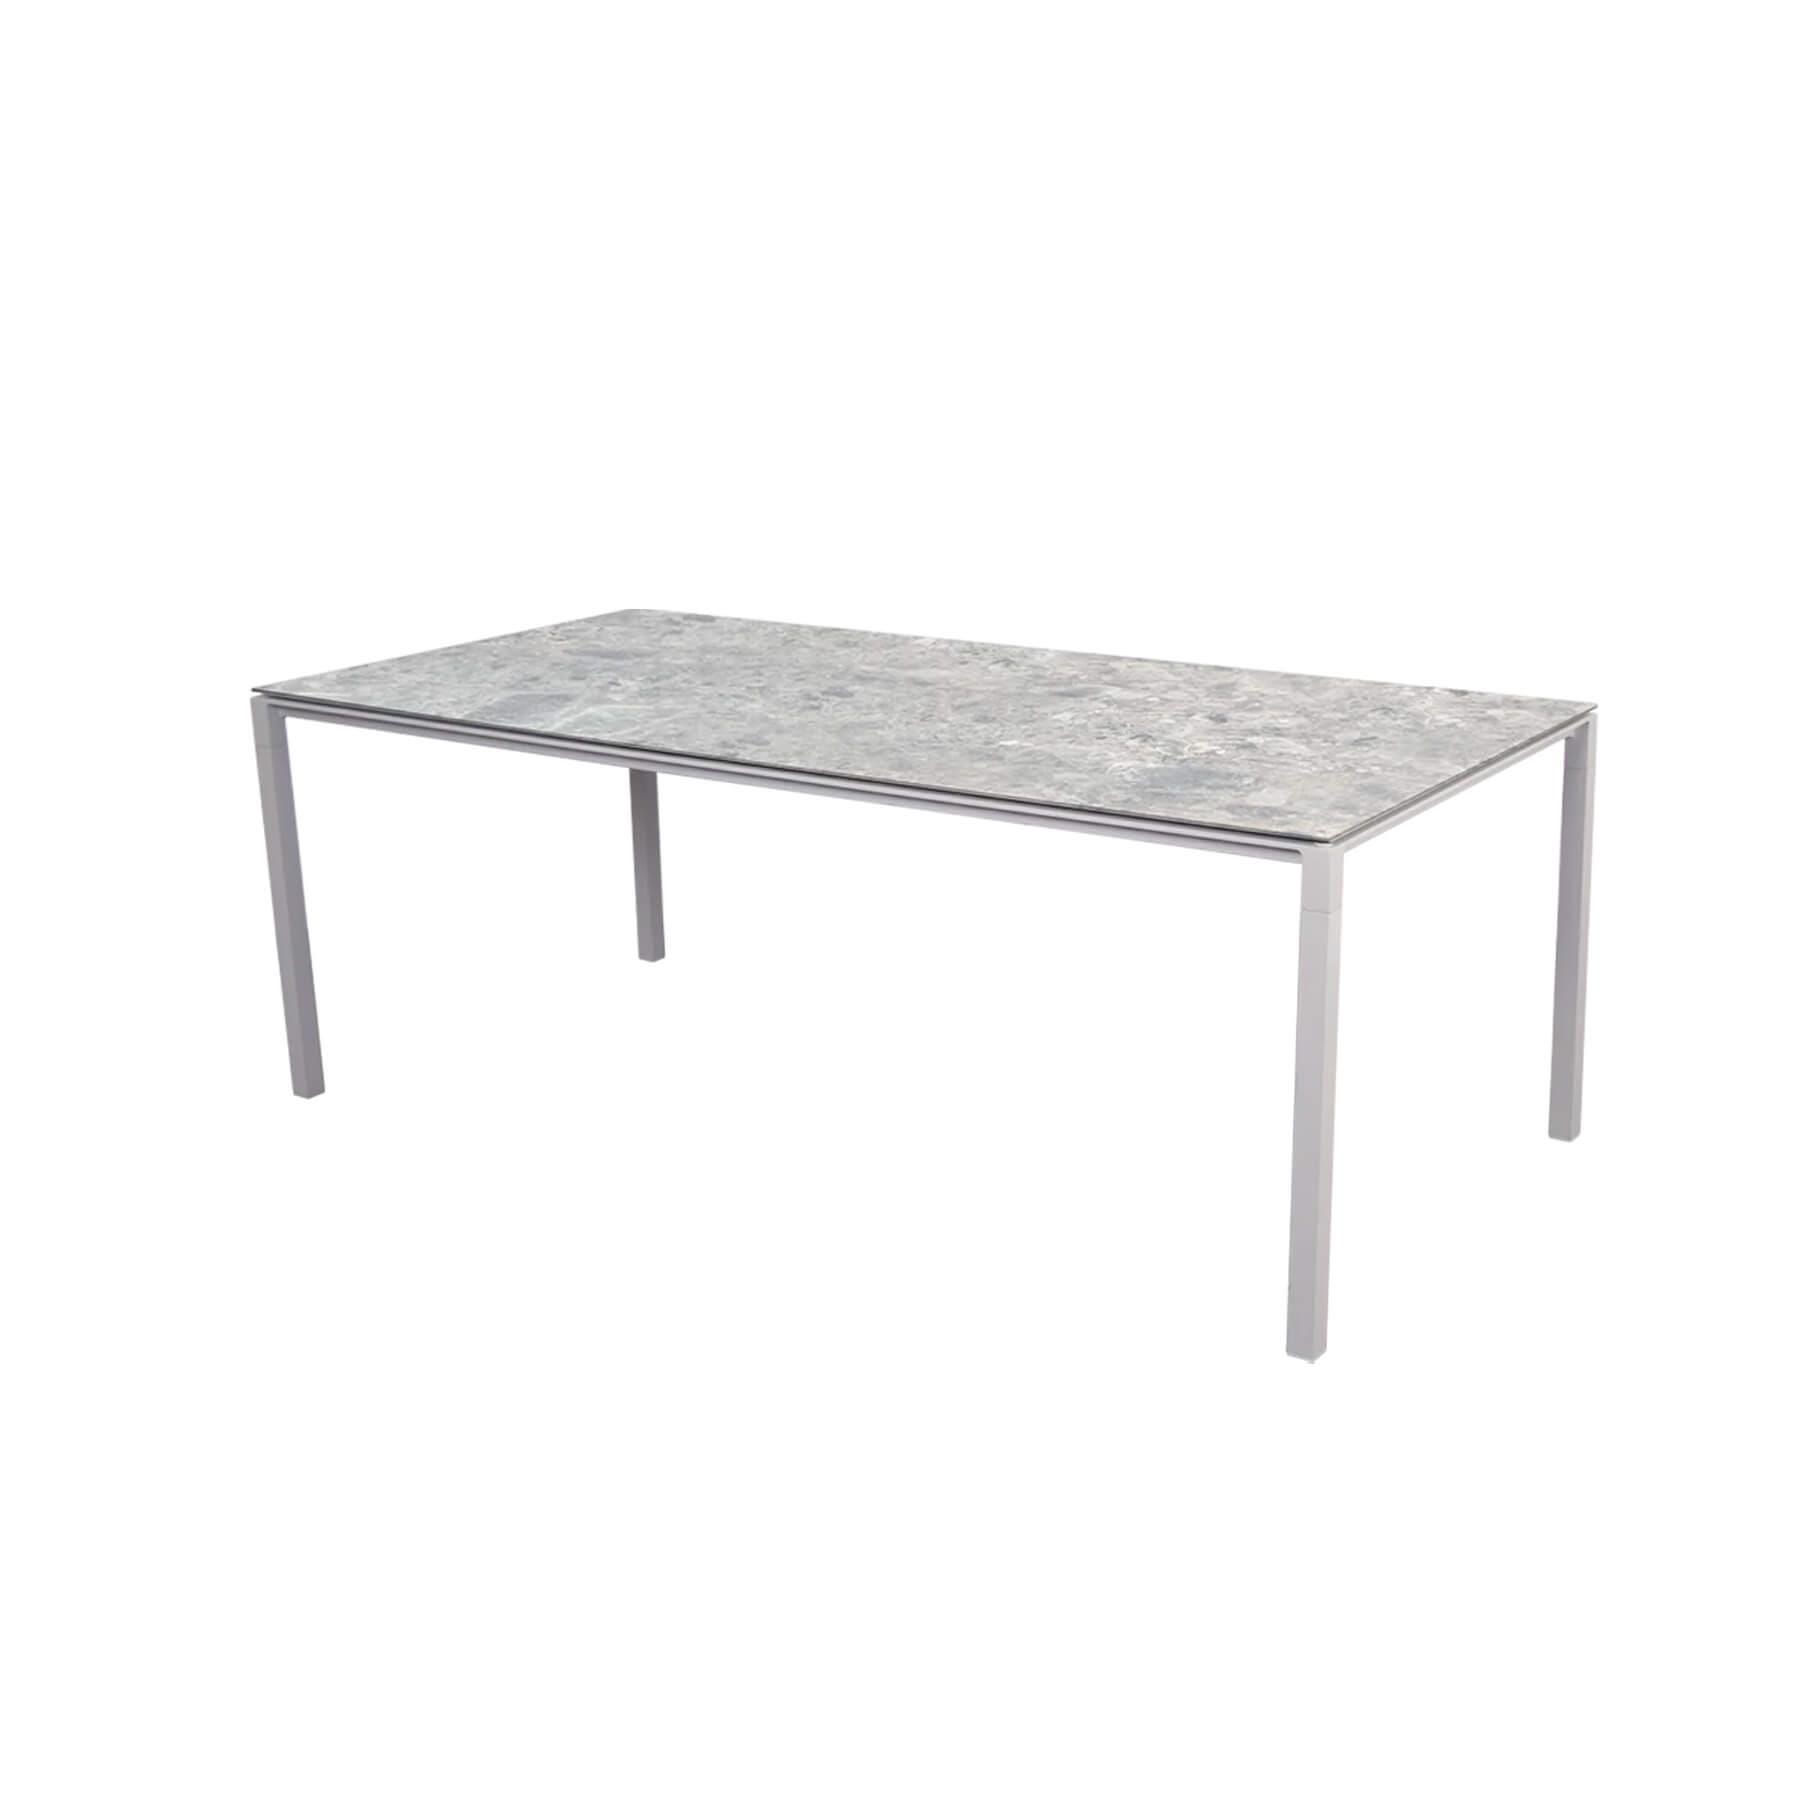 Caneline Pure Outdoor Dining Table Large Ceramic Multi Colour Top Sand Legs